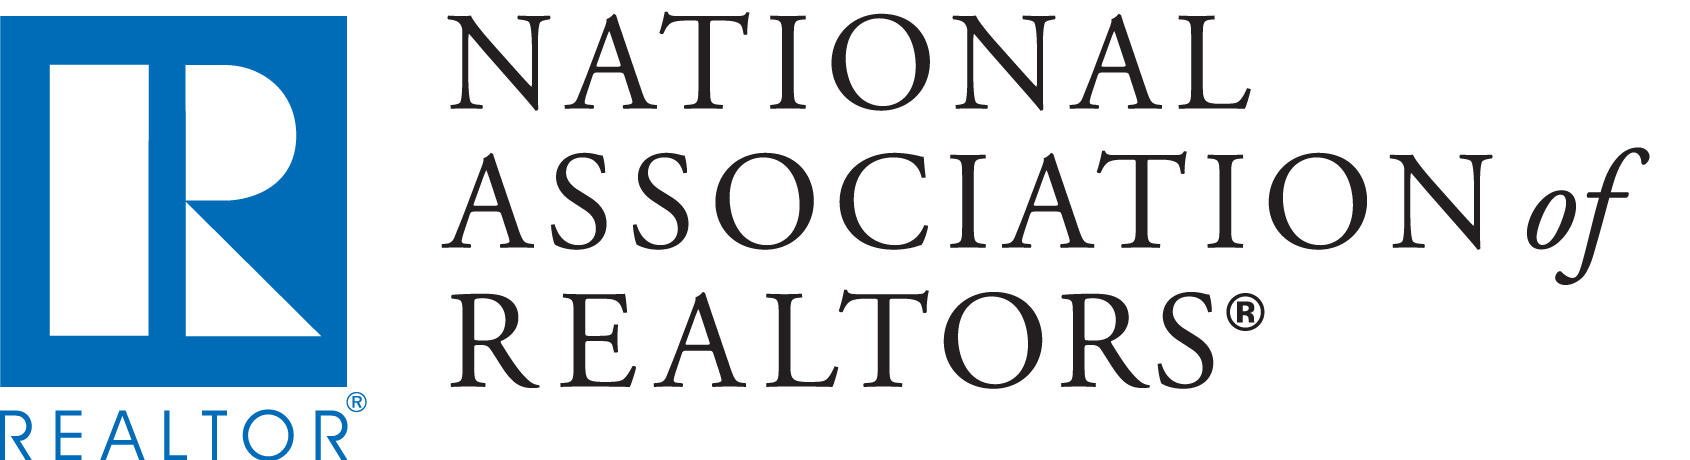 The National Association of Realtors (NAR) has installed Vince Malta as its 2020 president